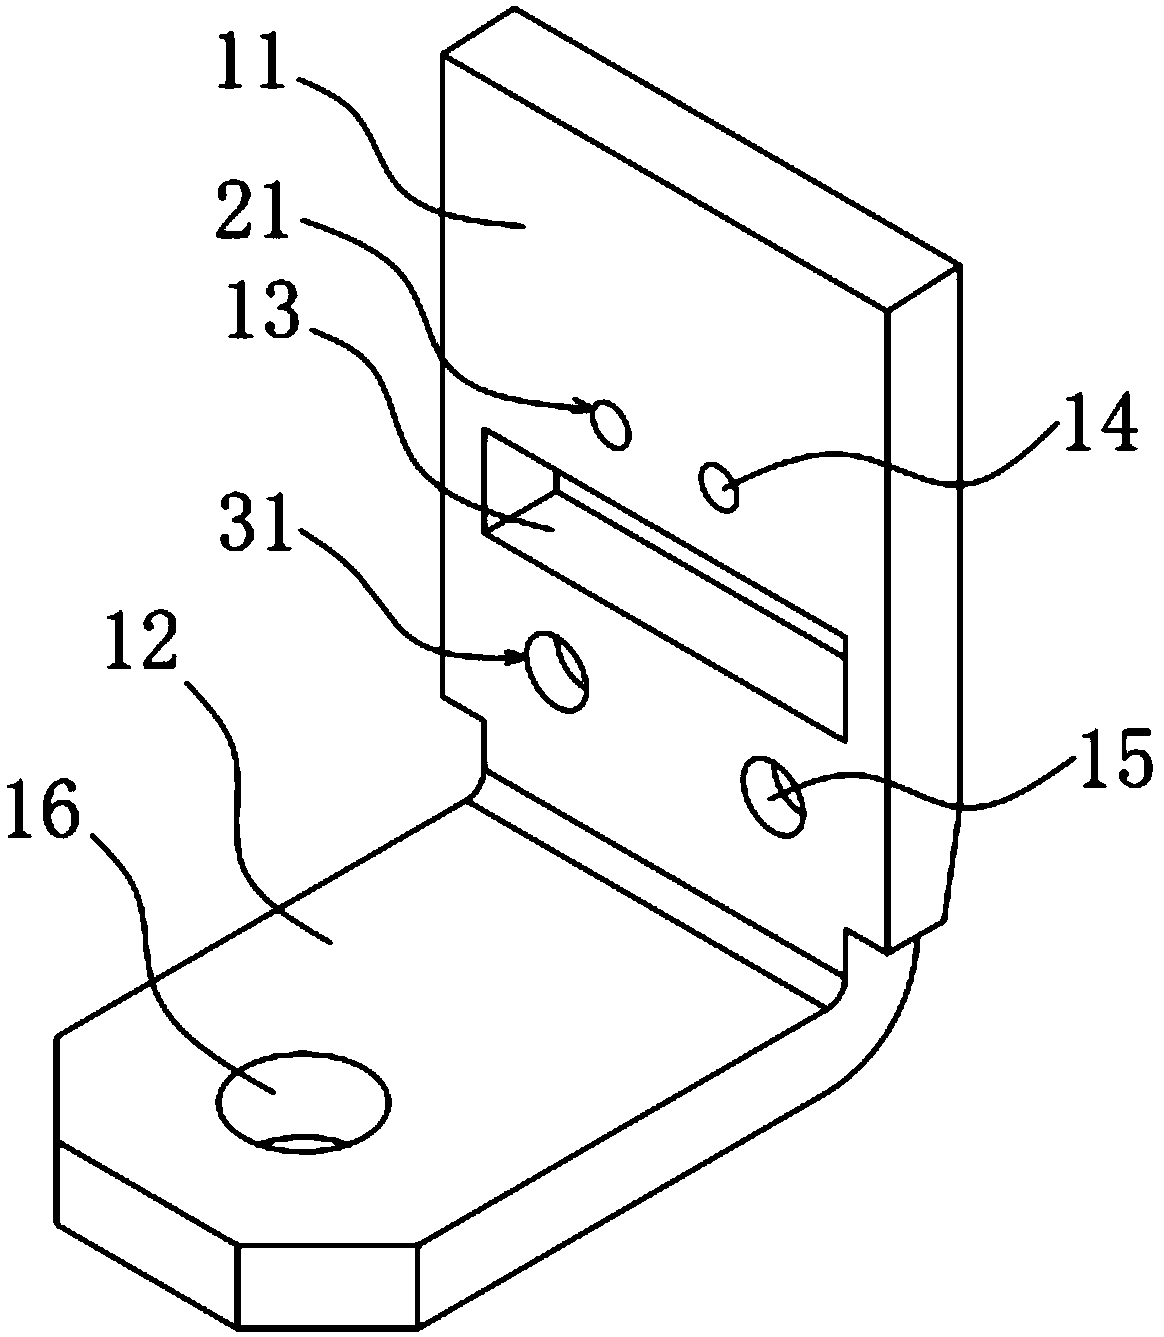 Electromagnetic system of clapper type magnetic latching relay, and assembly method thereof